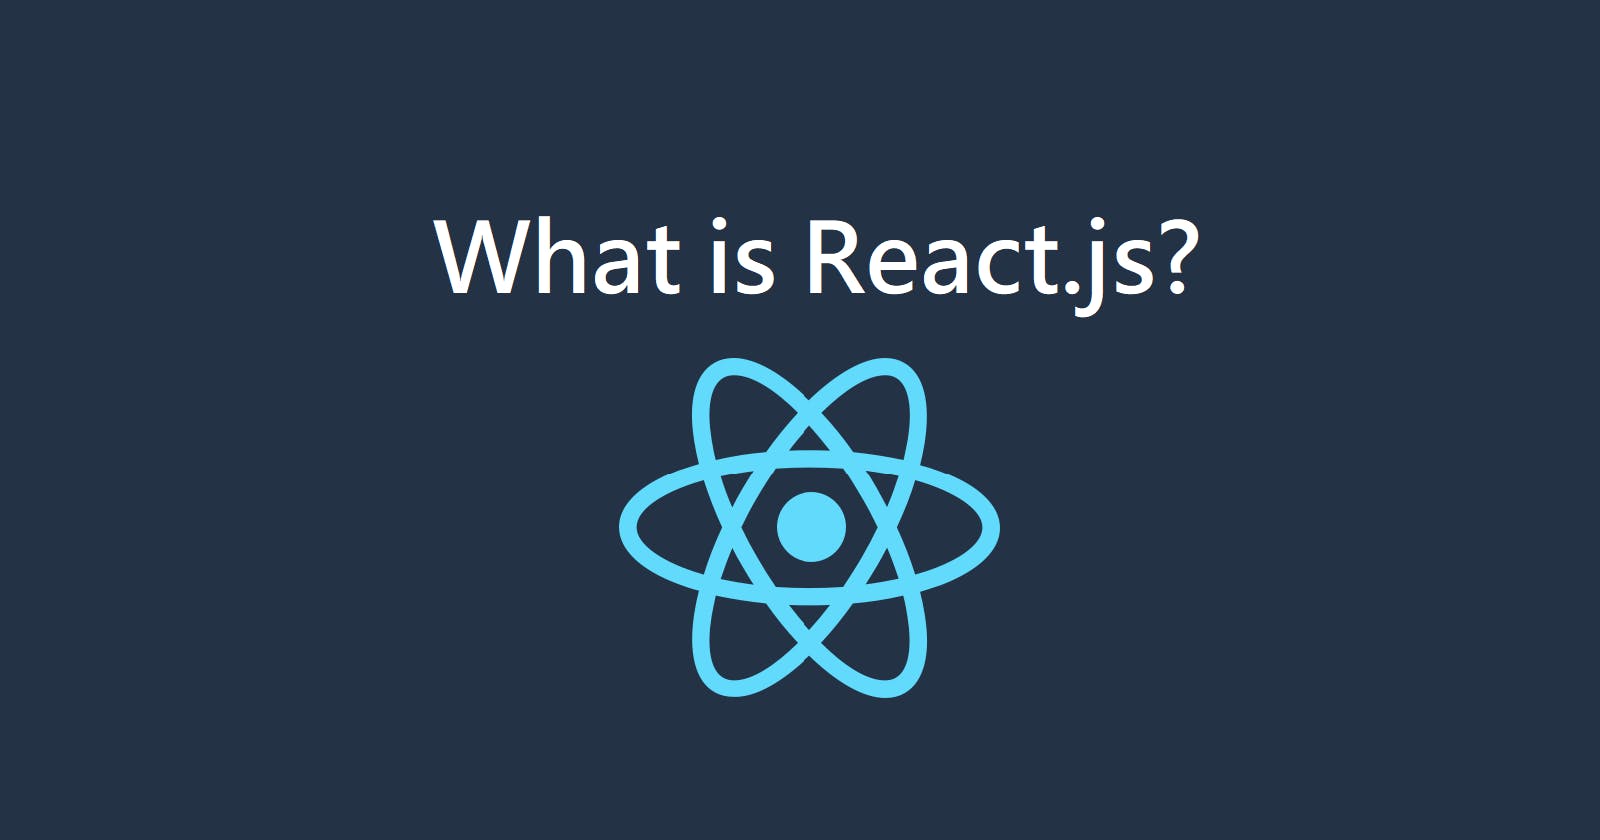 Day 1: What is React.js?